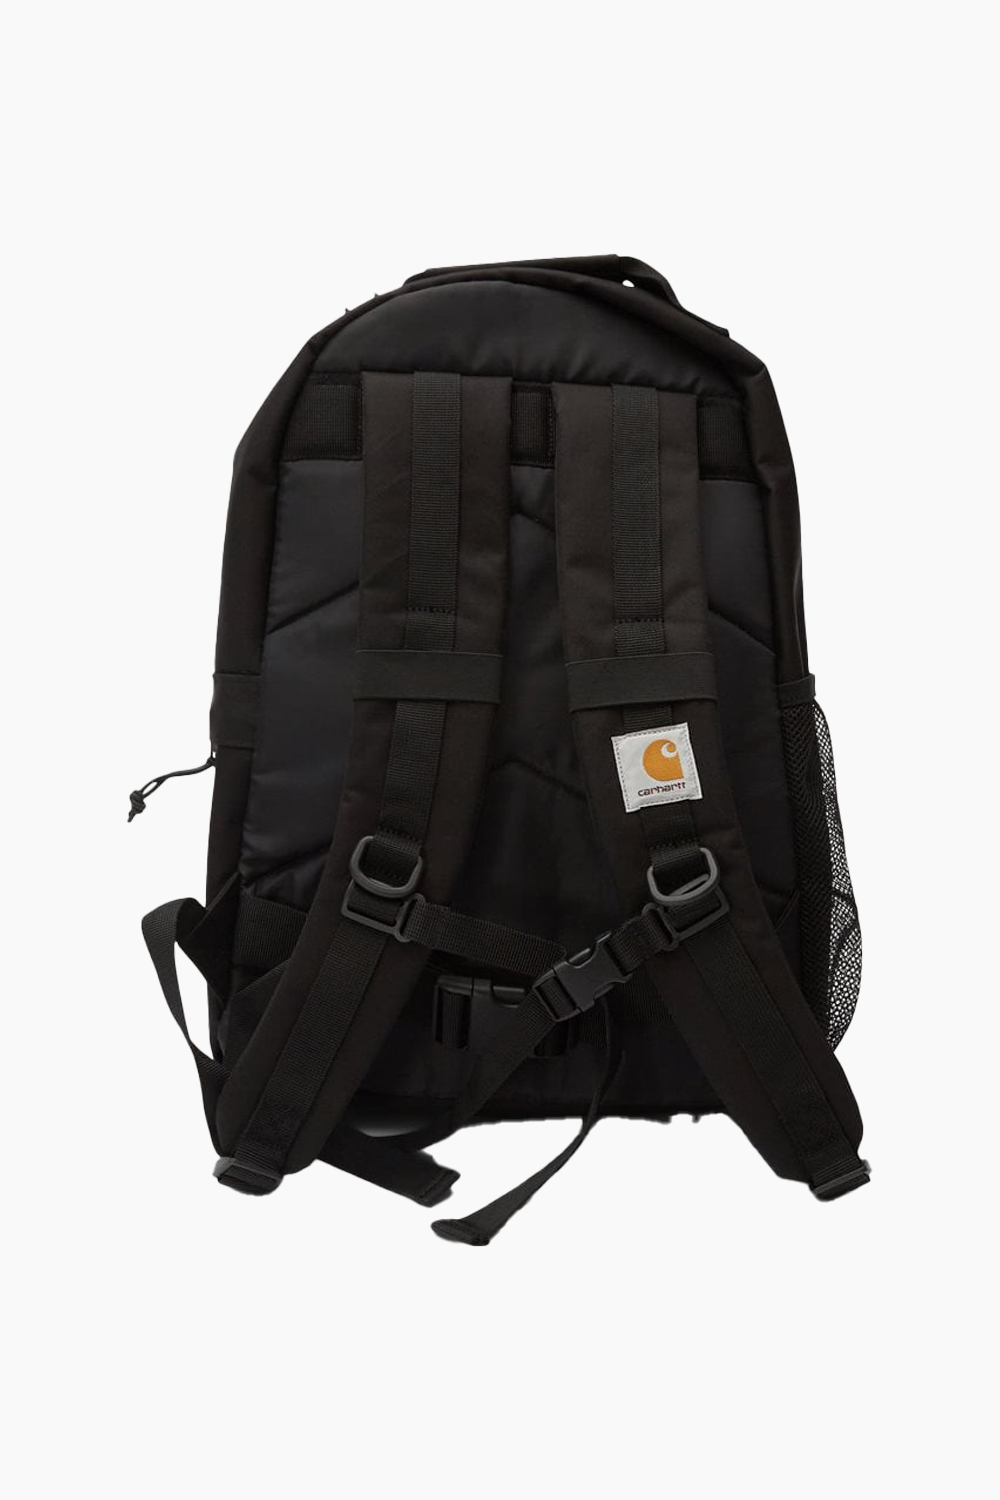 Kickflip Backpack Recycled Polyester Canvas - Black - Carhartt WIP